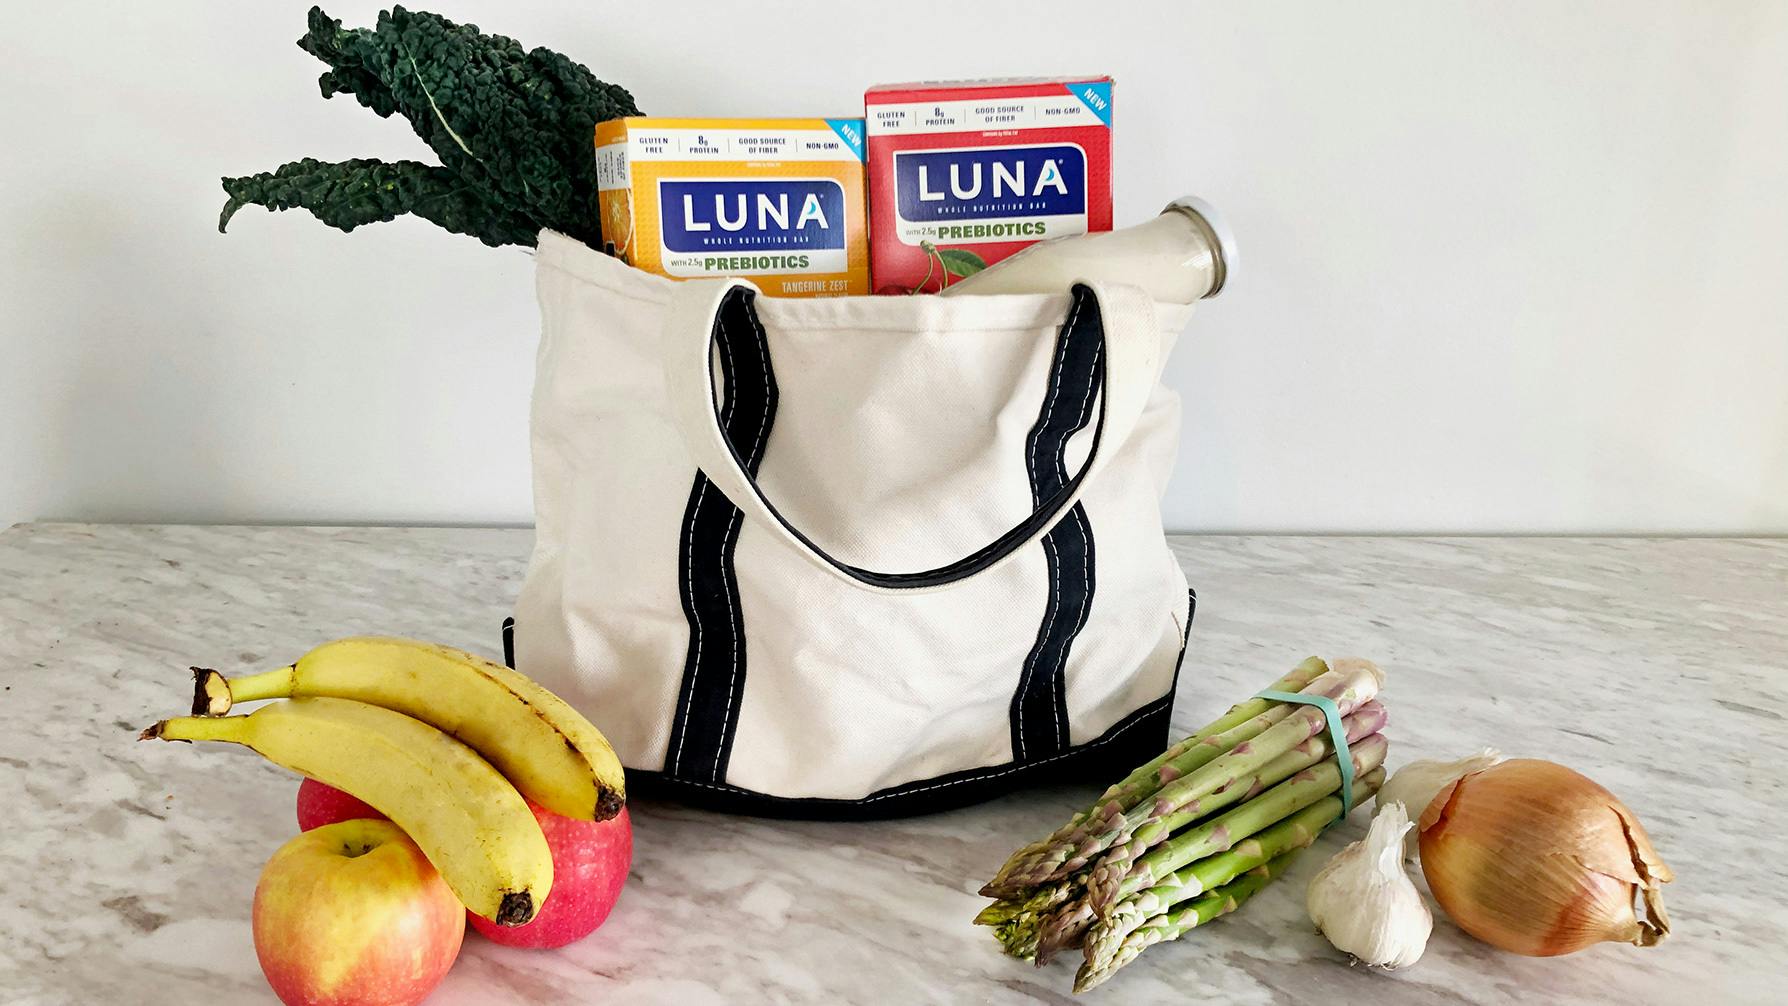 Grocery bag with LUNA Bars with prebiotics, vegetables, and fruit